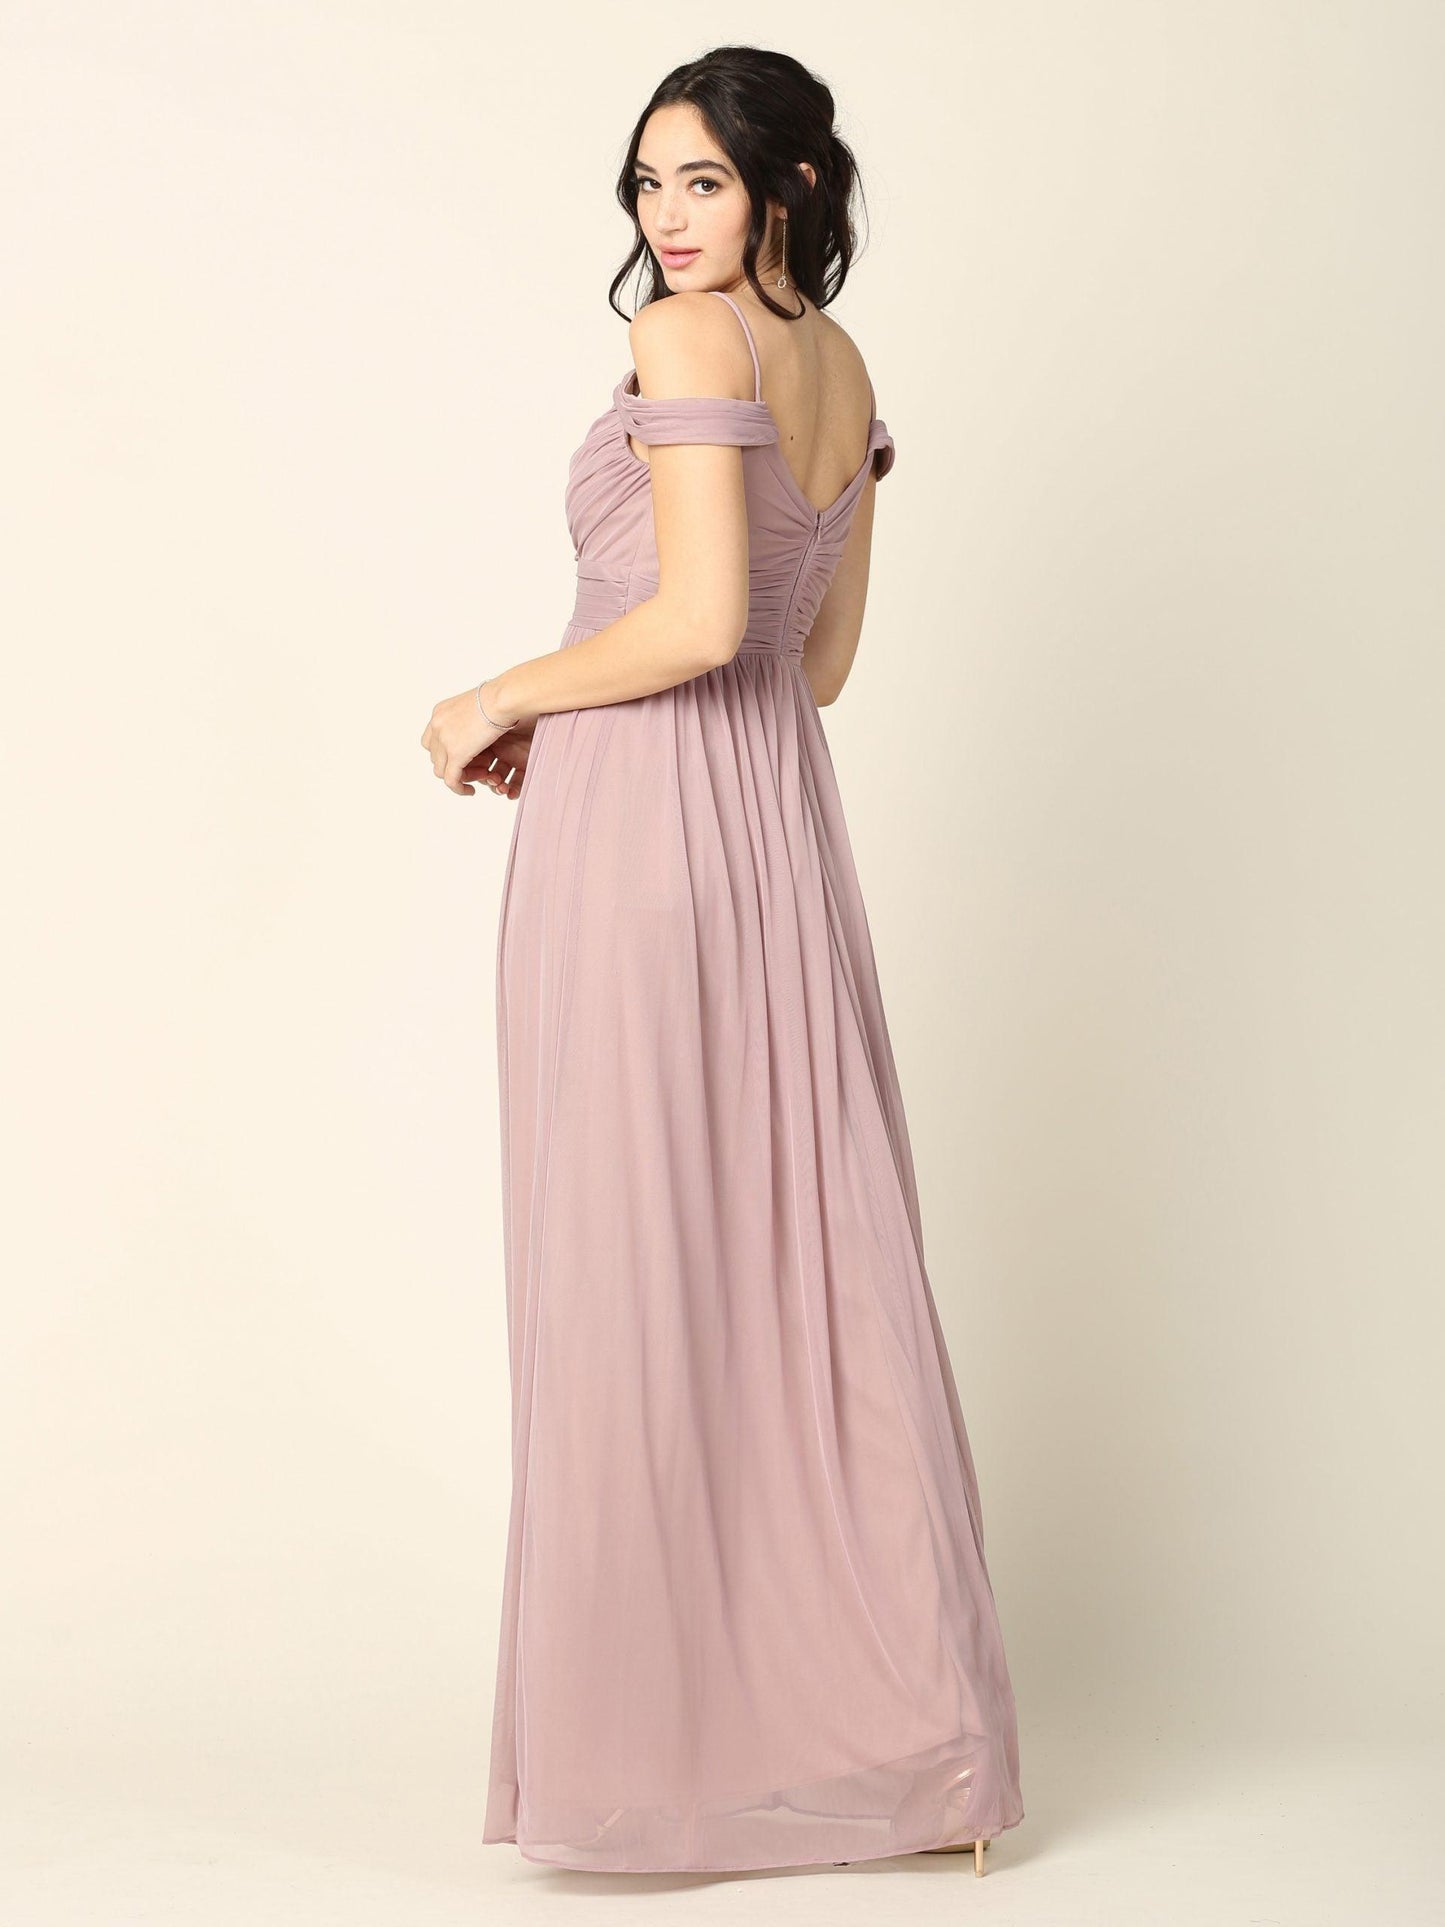 Long Off Shoulder Bridesmaid Pleated Dress - The Dress Outlet